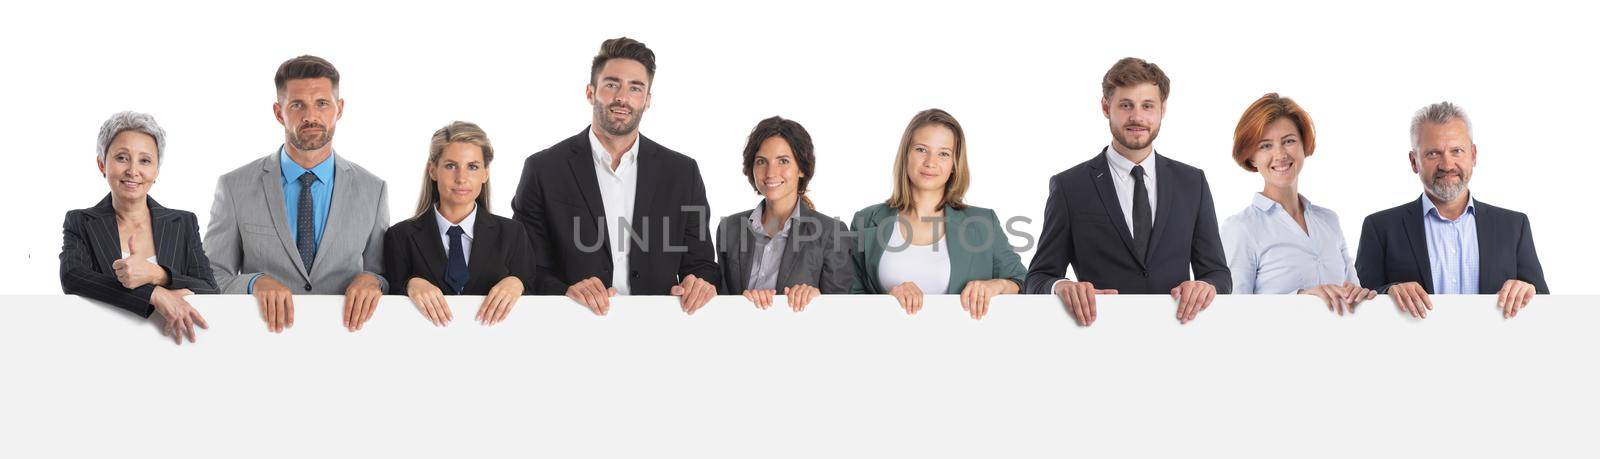 Business team with blank banner by ALotOfPeople